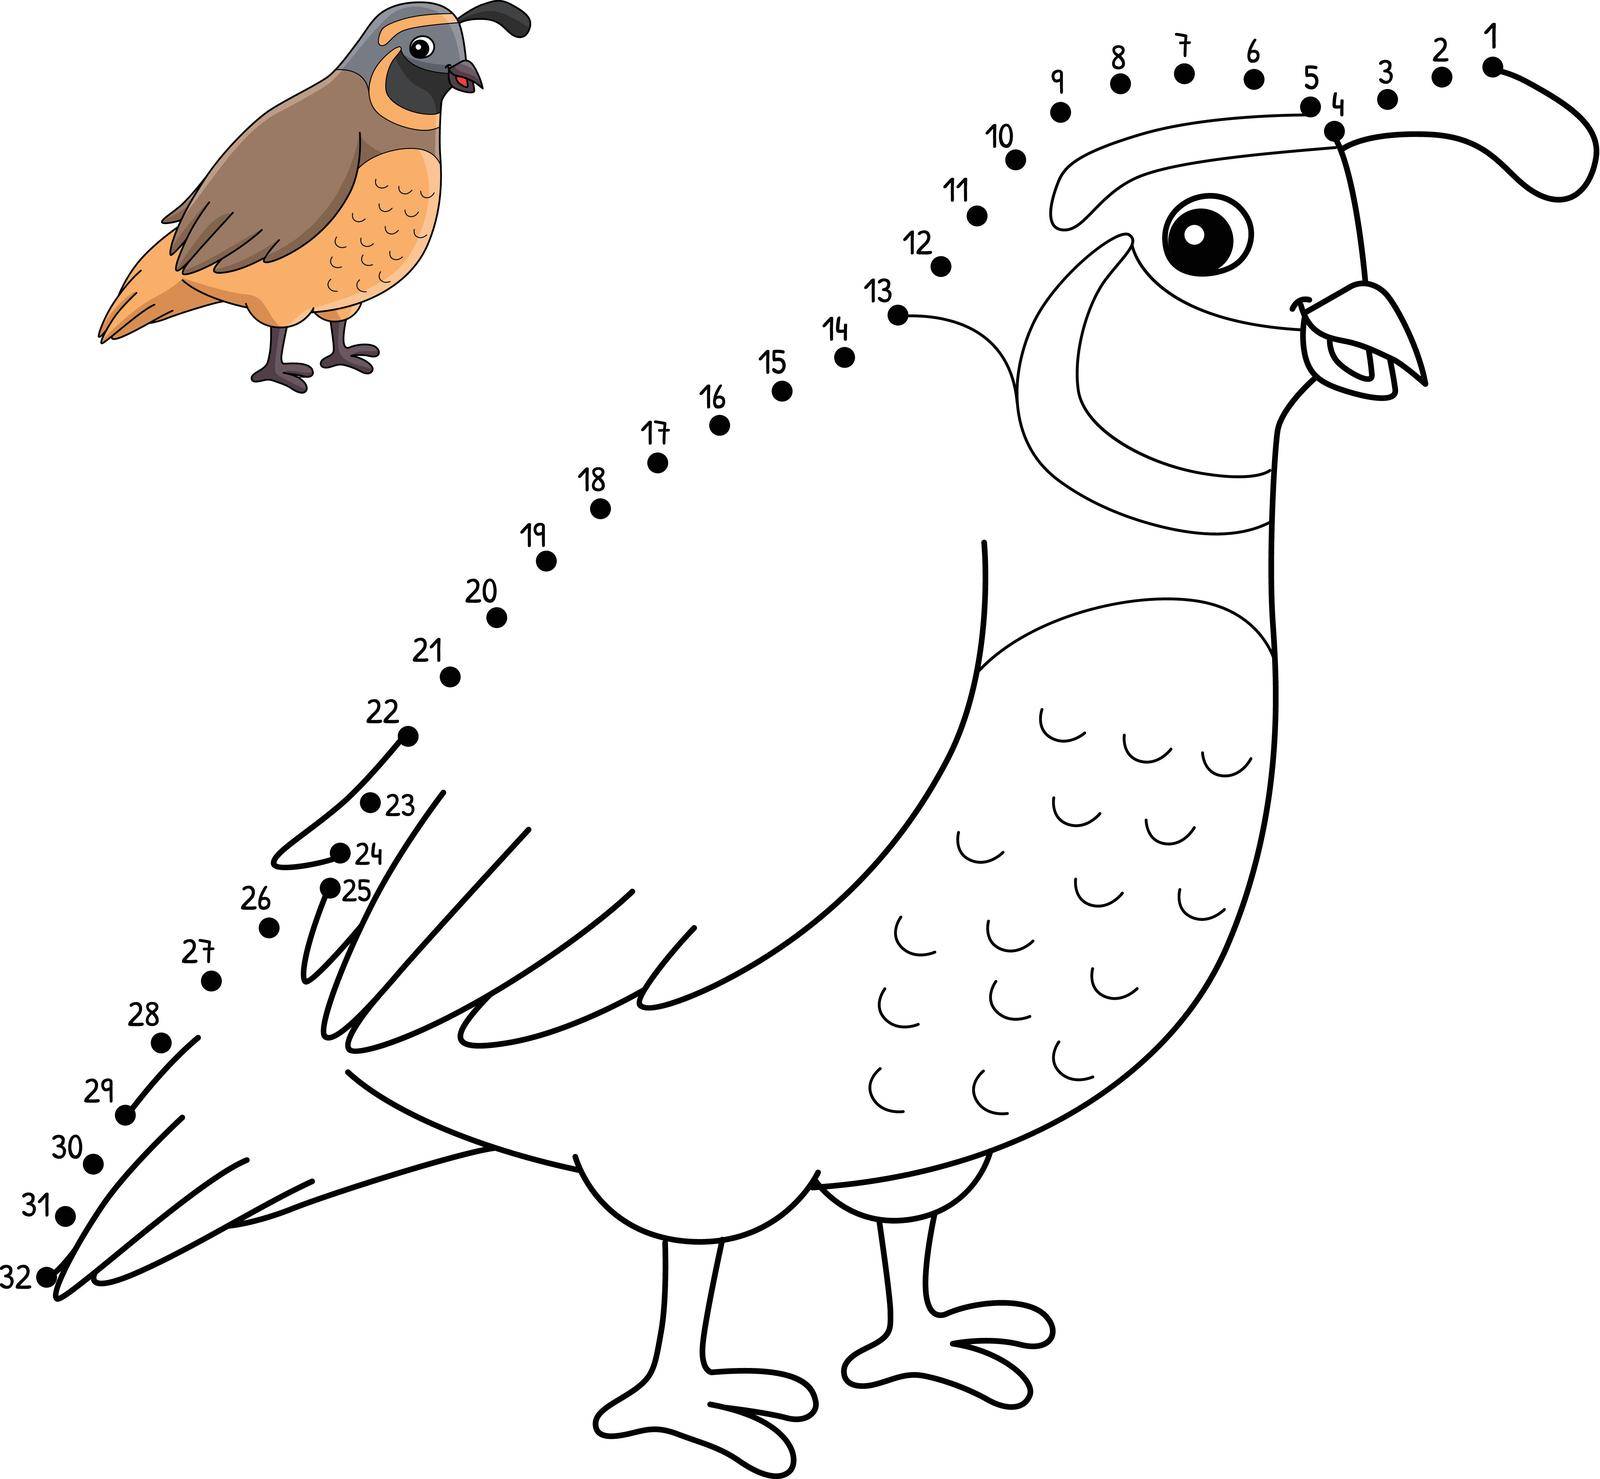 A cute and funny connect-the-dots coloring page of a Quail Animal. Provides hours of coloring fun for children. Color, this page is very easy. Suitable for little kids and toddlers.